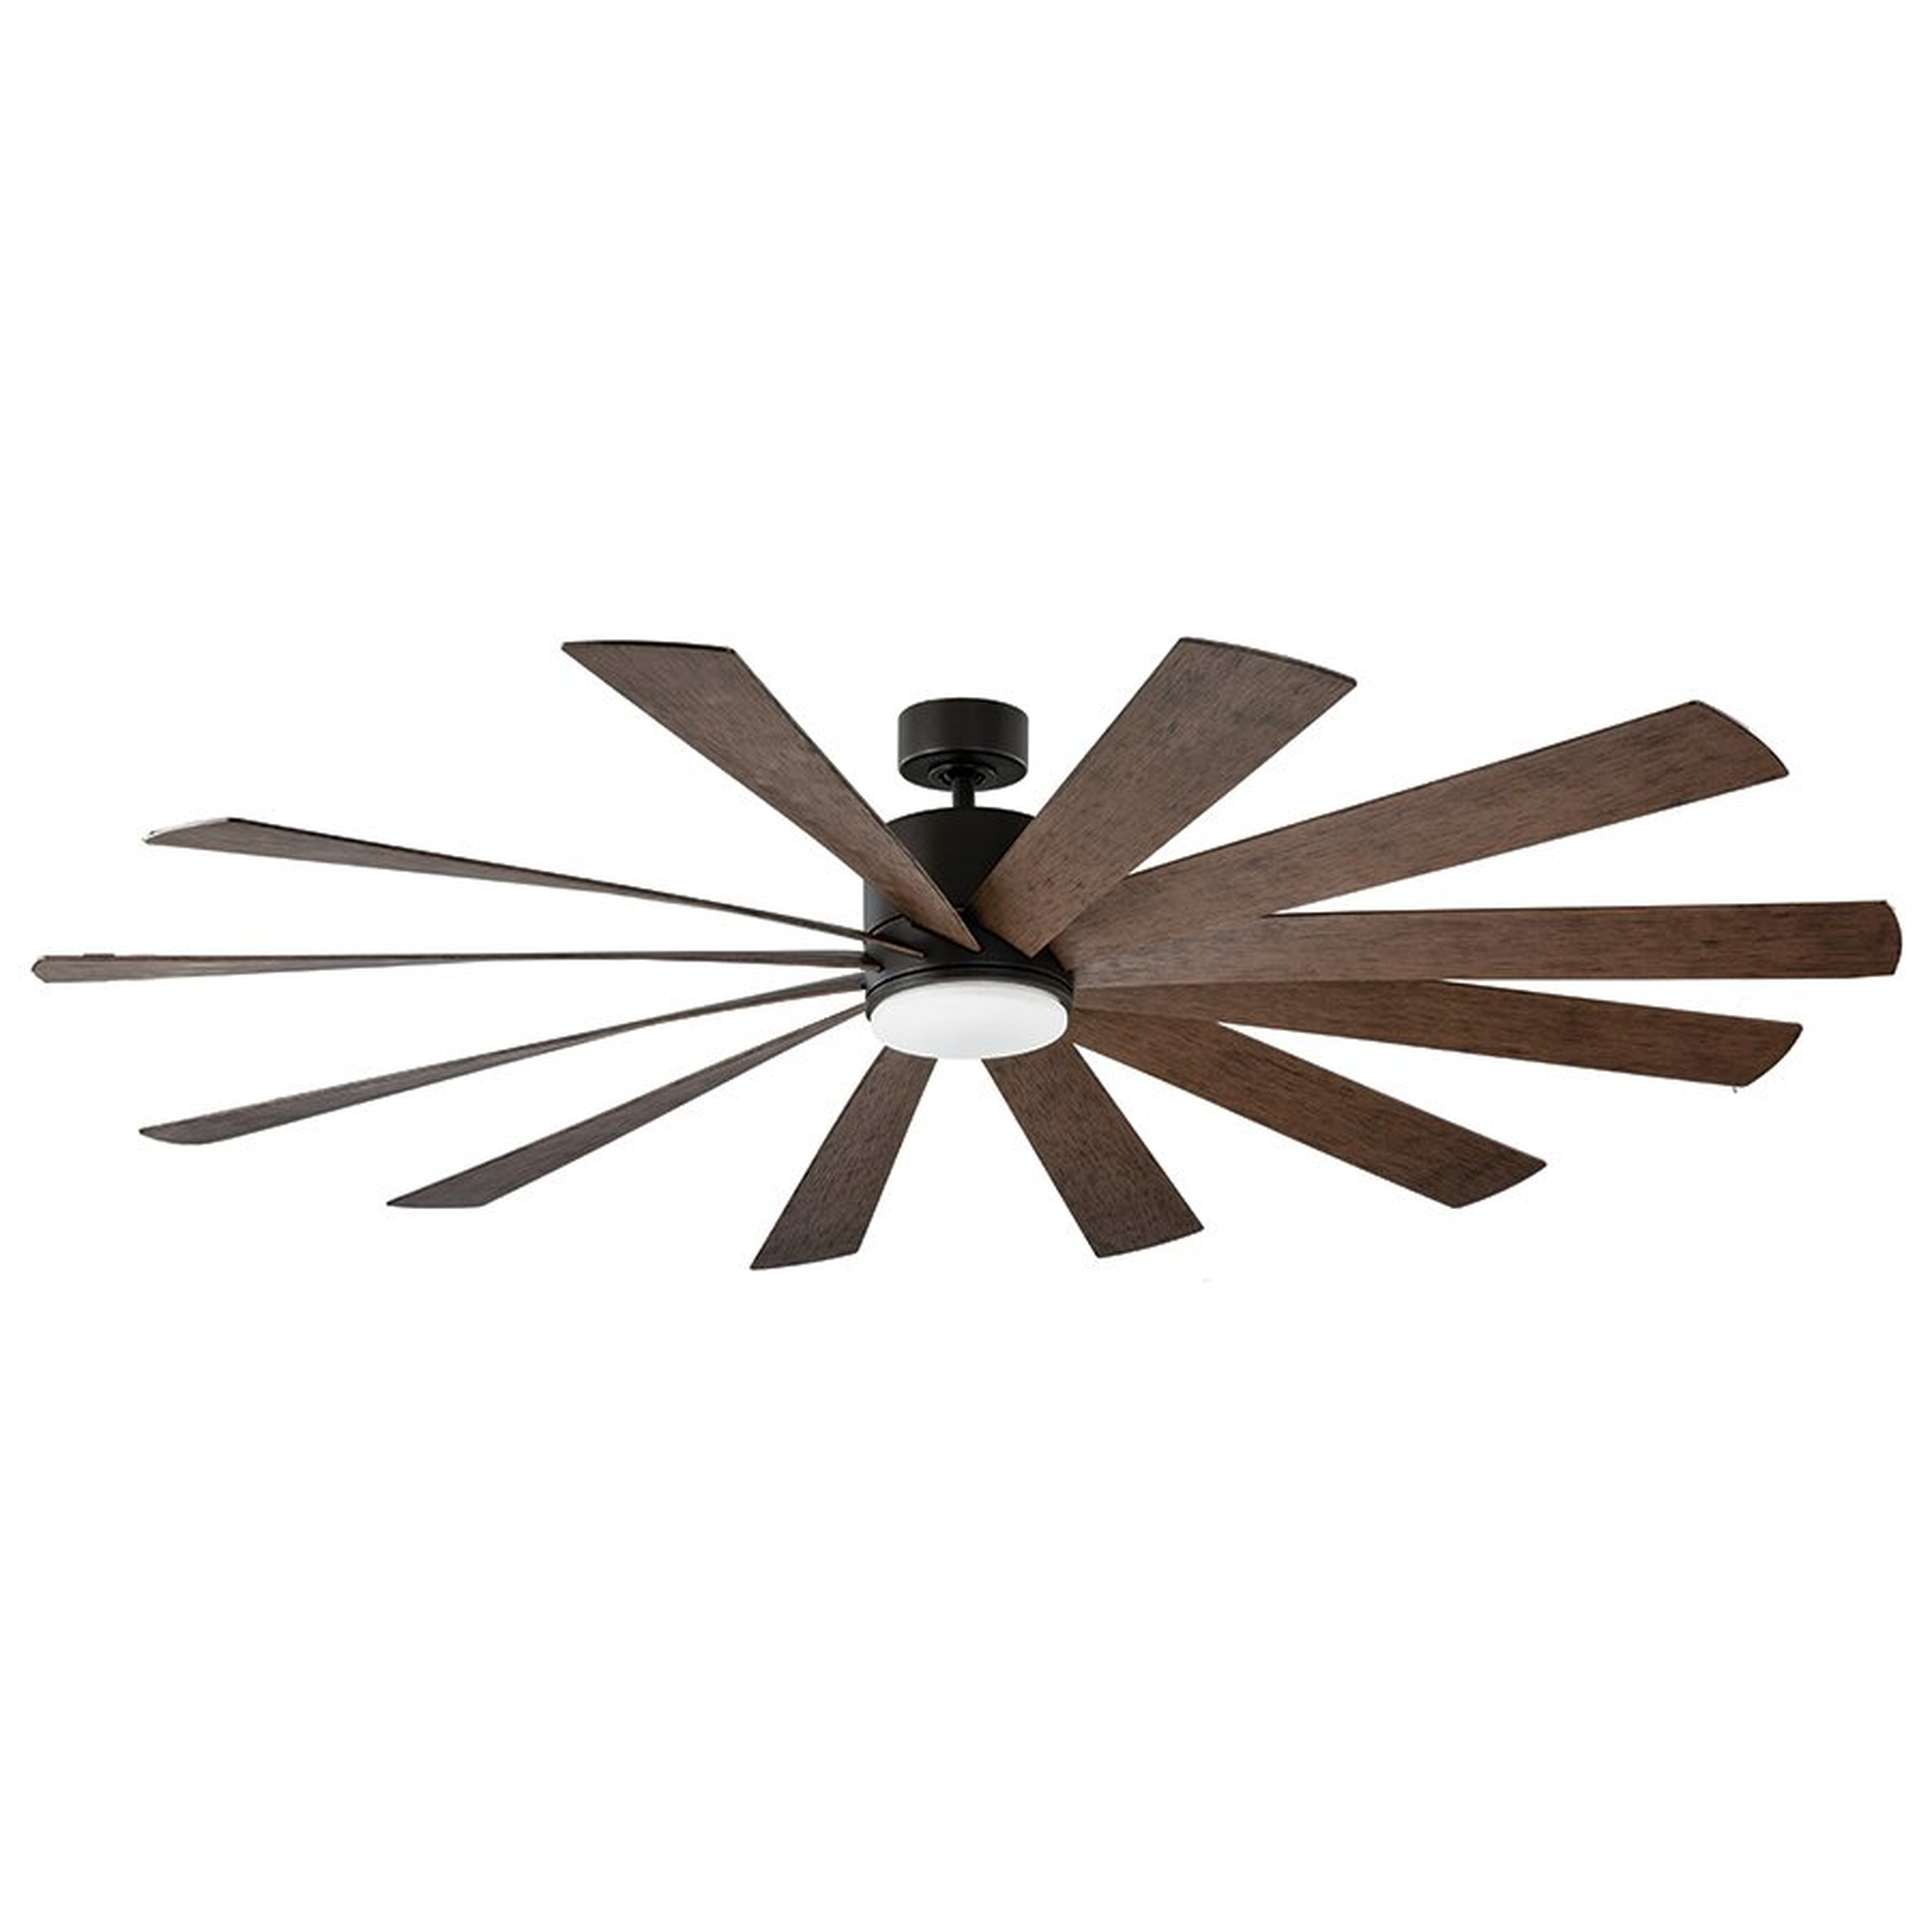 "Modern Forms Windflower 12 - Blade Outdoor LED Windmill Ceiling Fan with Light Kit Included" - Perigold